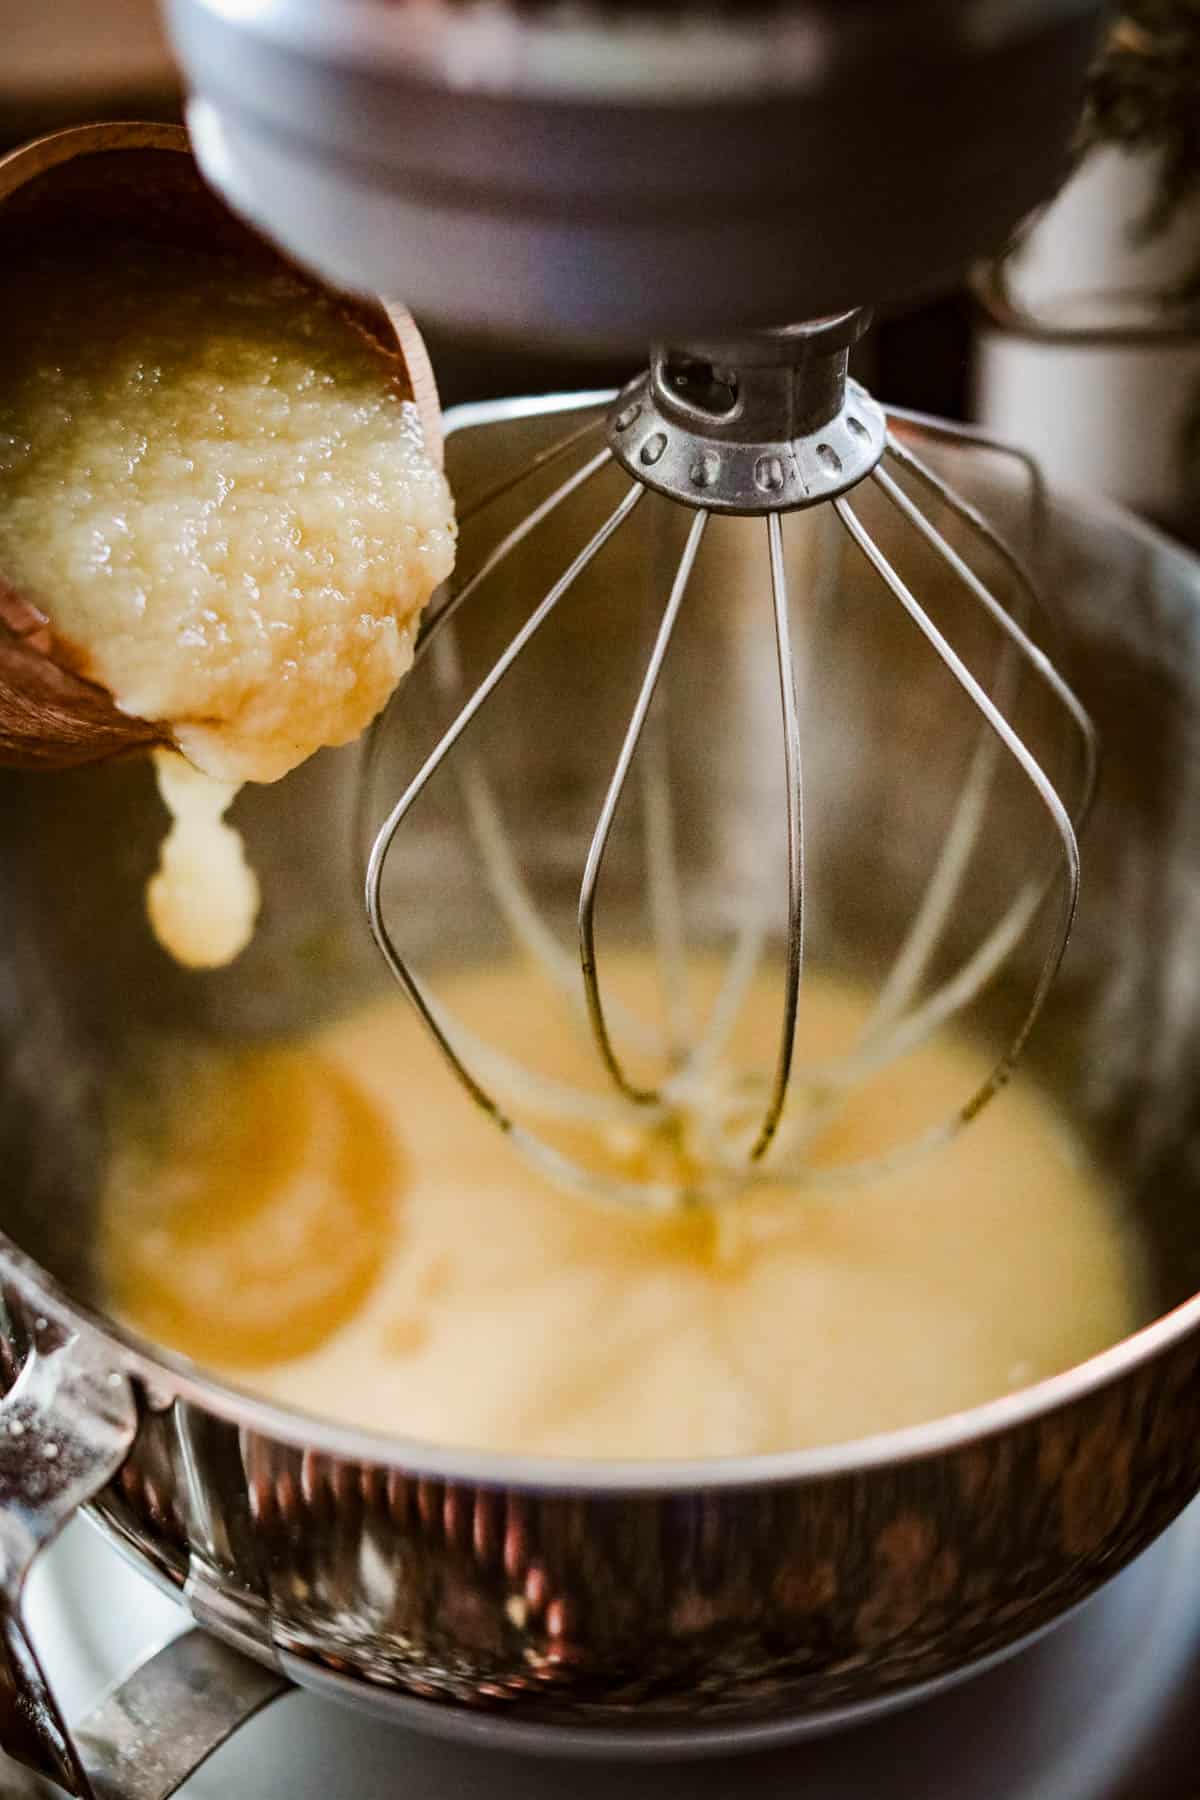 A bowl of batter for an apple cider donut cake being mixed with a wooden spoon.